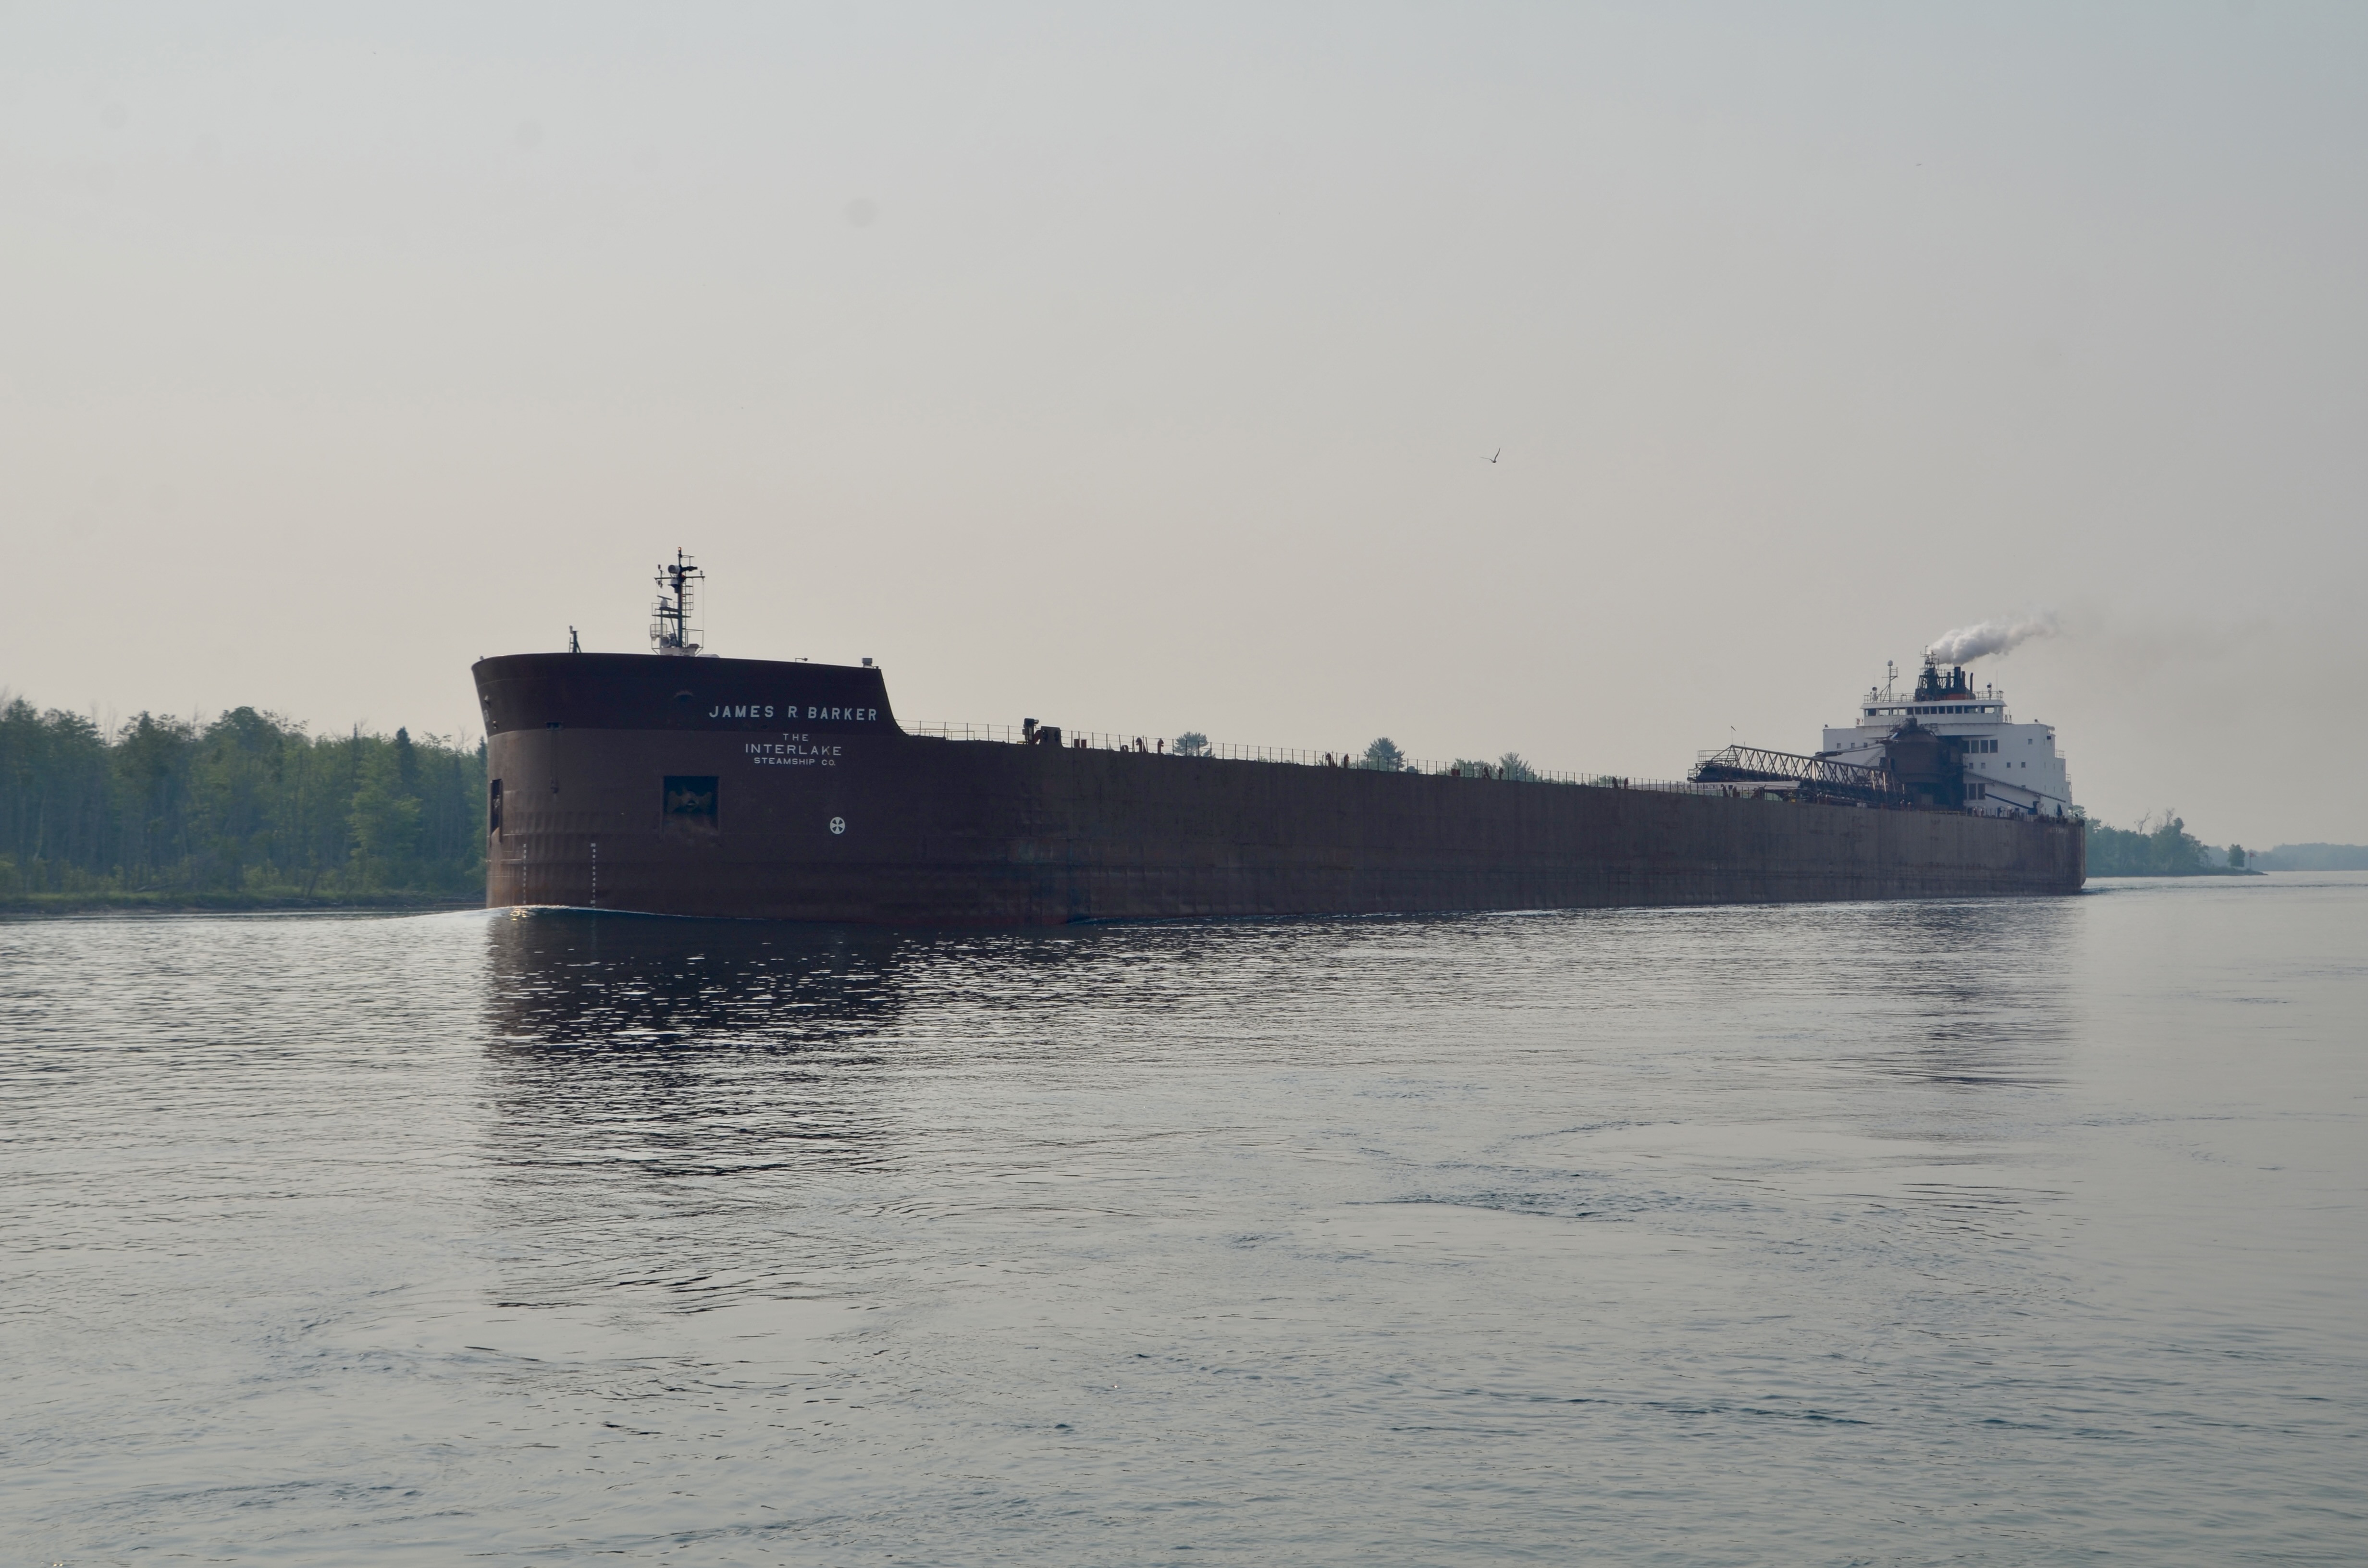 James R. Barker approaches Rotary Park in Sault Ste. Marie